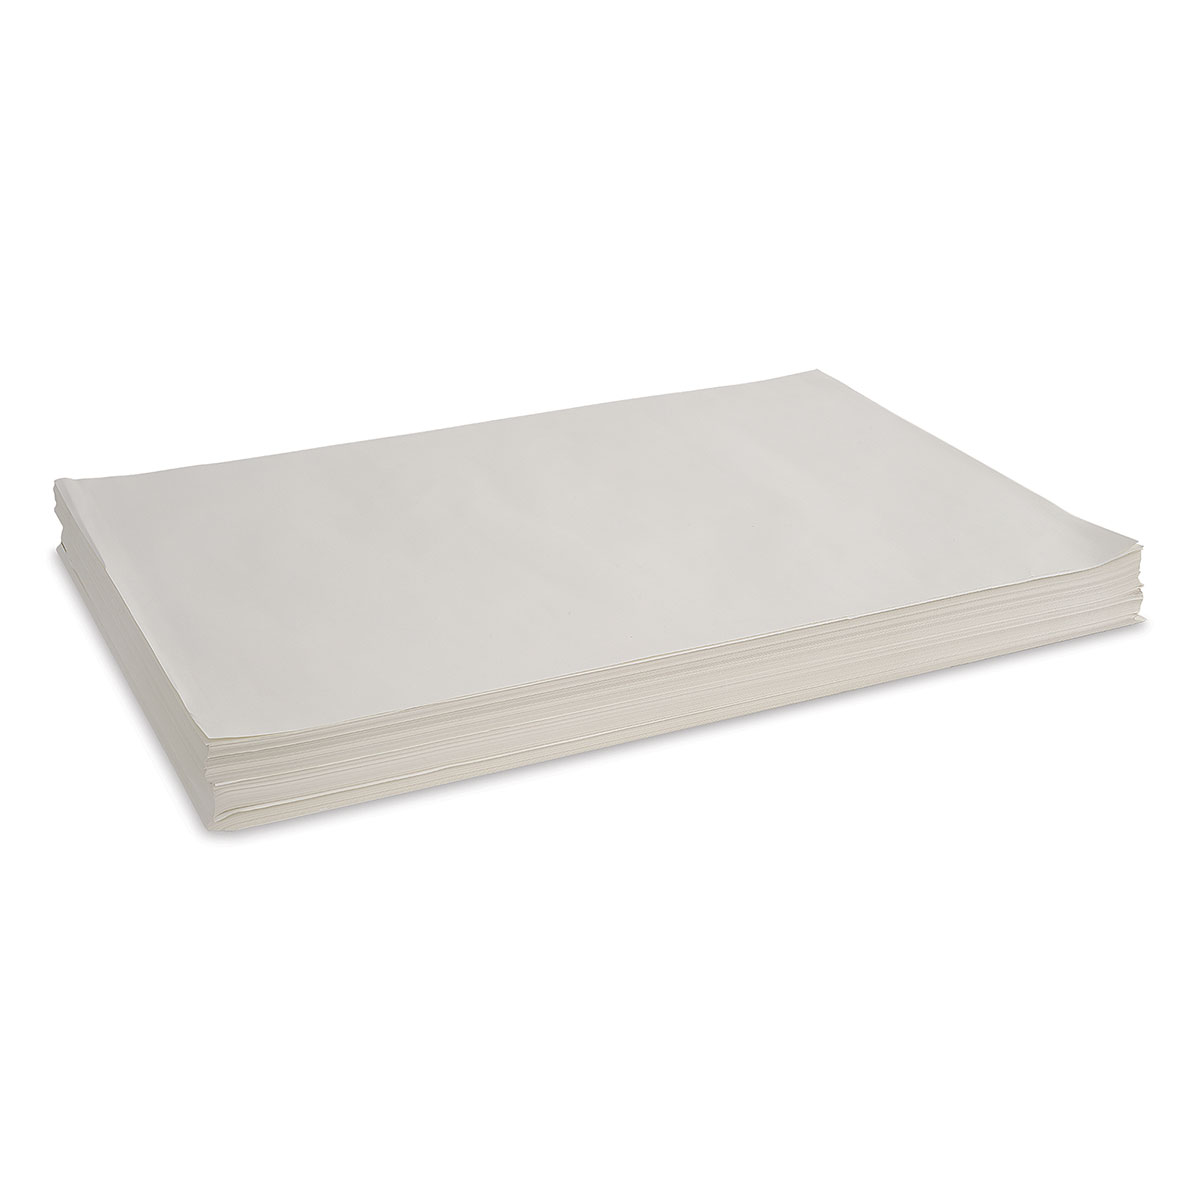 Blick Sulphite Drawing Papers 24" x 36", White, 500 Sheets, 50 lb